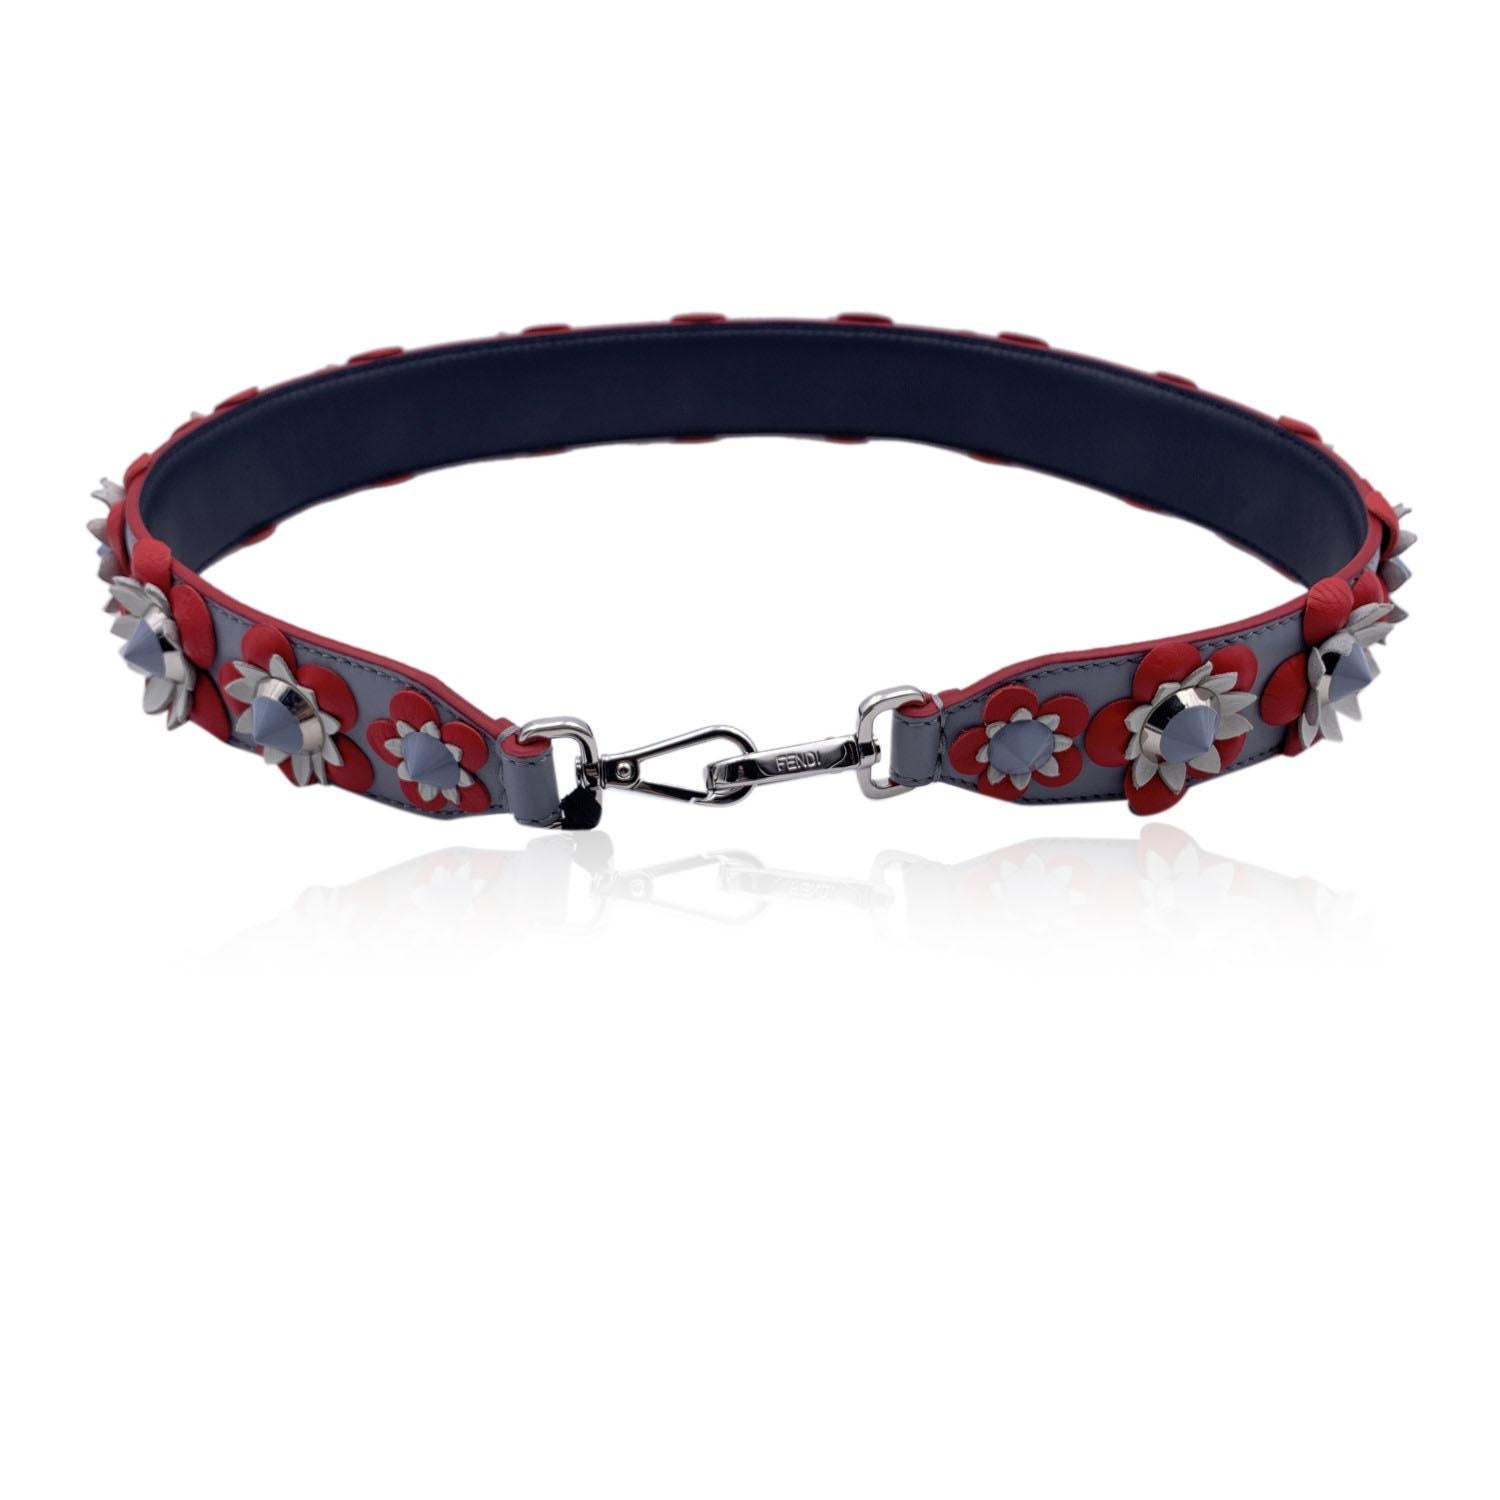 Fendi shoulder strap You in dove grey, red and white leather. Floral applications. Silver metal hardware. 'Fendi Roma' embossed on the strap. Strap width: 1.5 inches - 3.8 cm. Total length: 34 inches - 86.3 cm


Details

MATERIAL: Leather

COLOR: